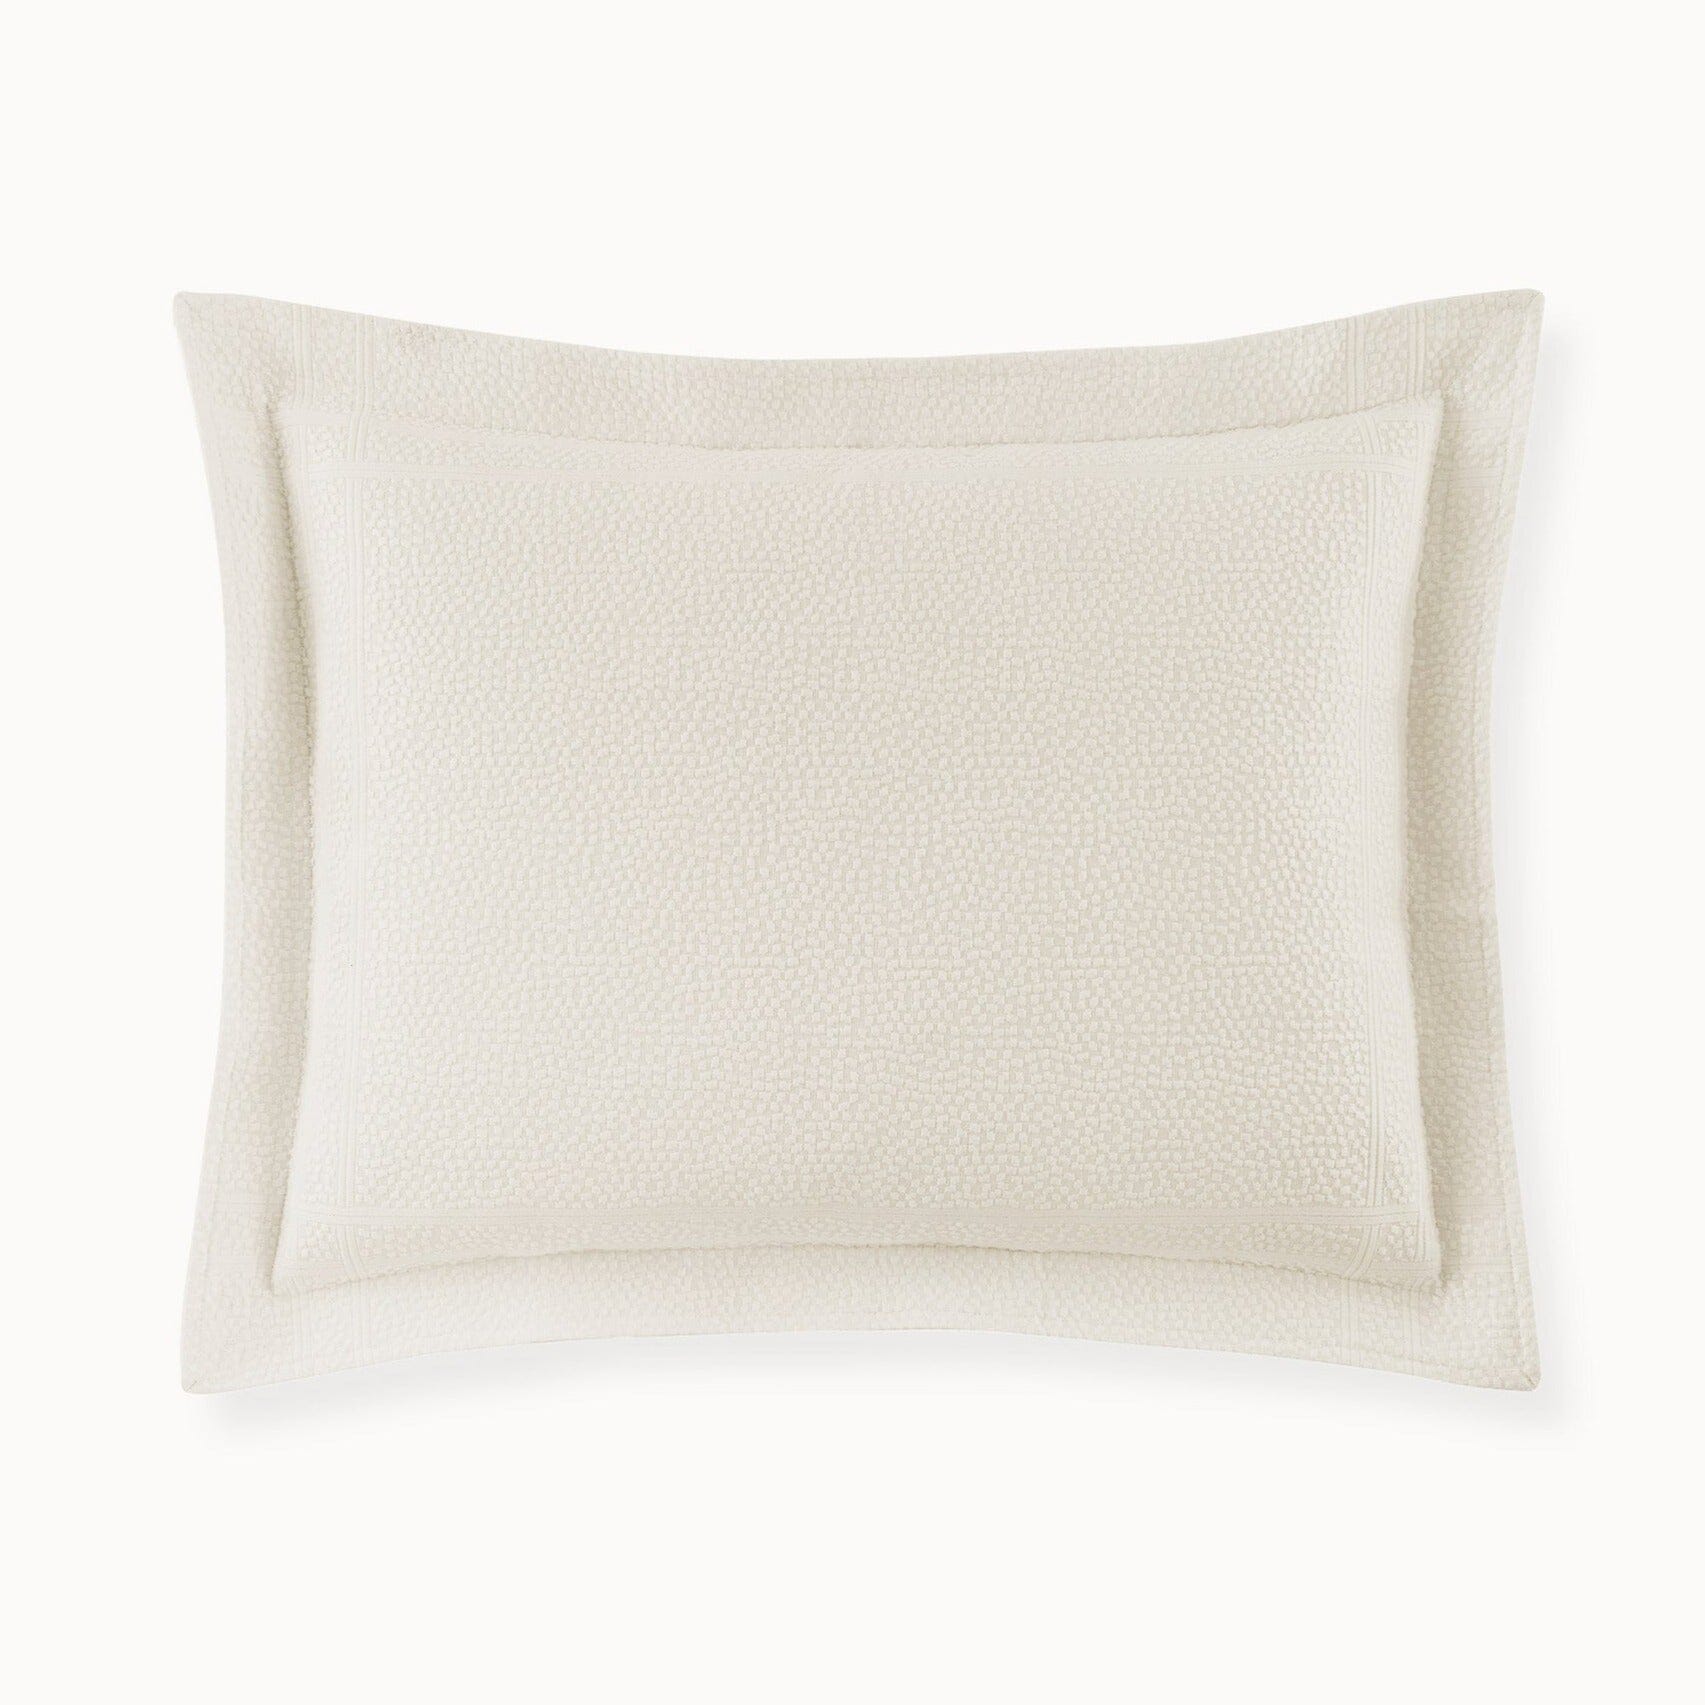 Pillow Sham - Montauk Linen Matelasse by Peacock Alley | Fig Linens and Home